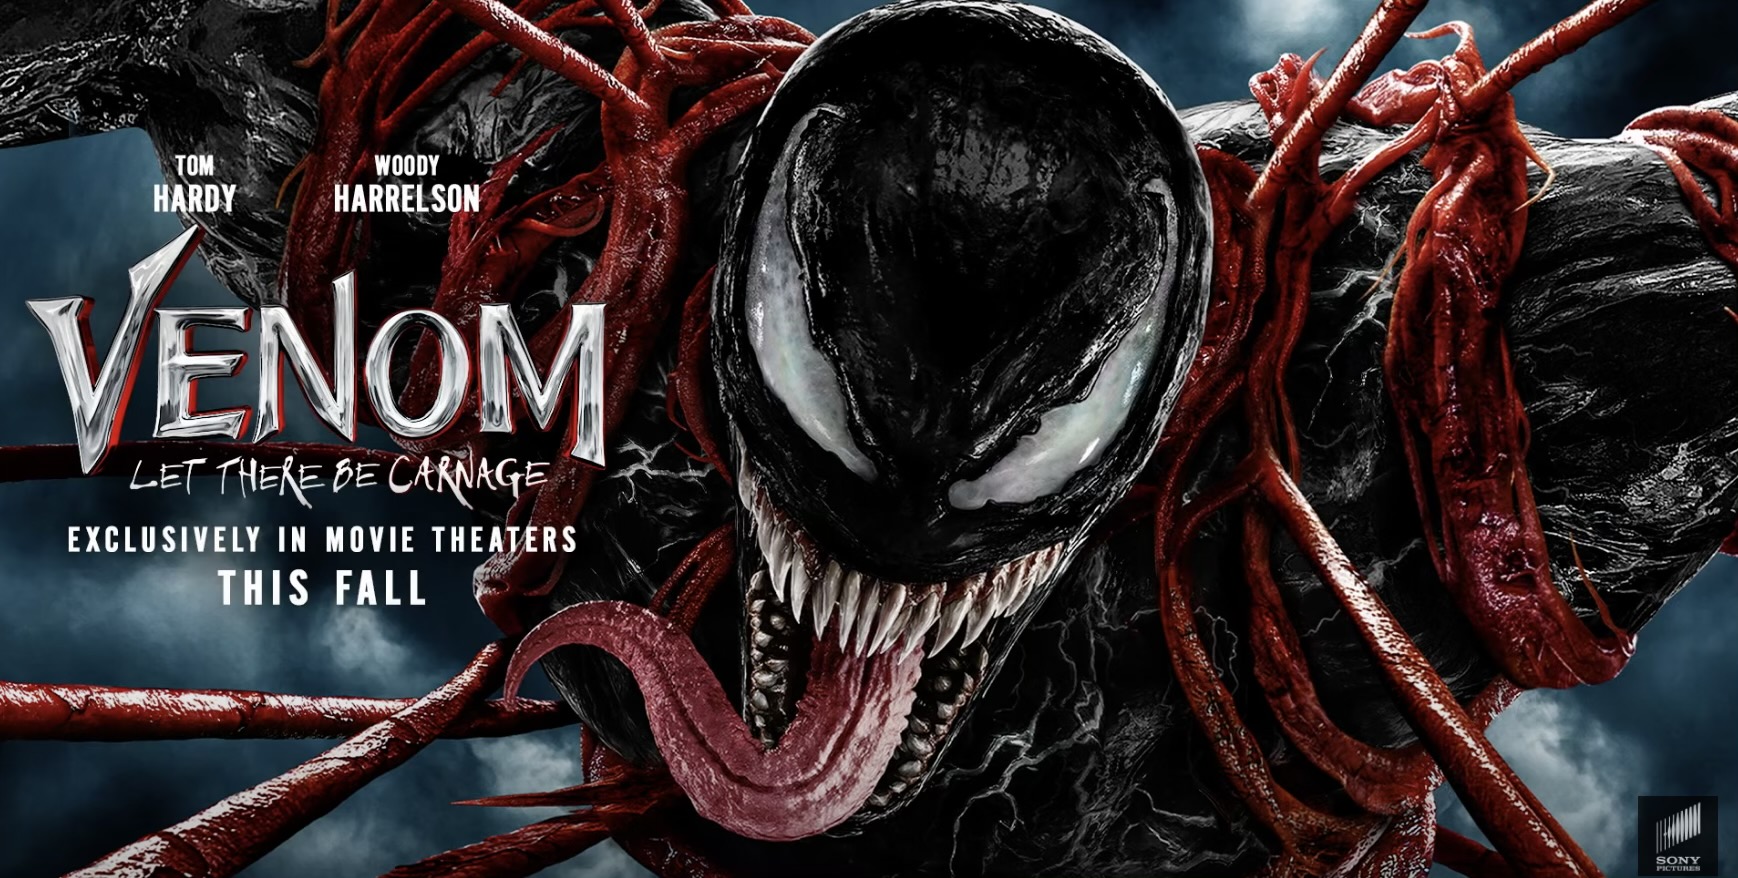 What Apps Is Venom Let There Be Carnage On New Venom: Let There Be Carnage Trailer Filled With –– You Guessed It